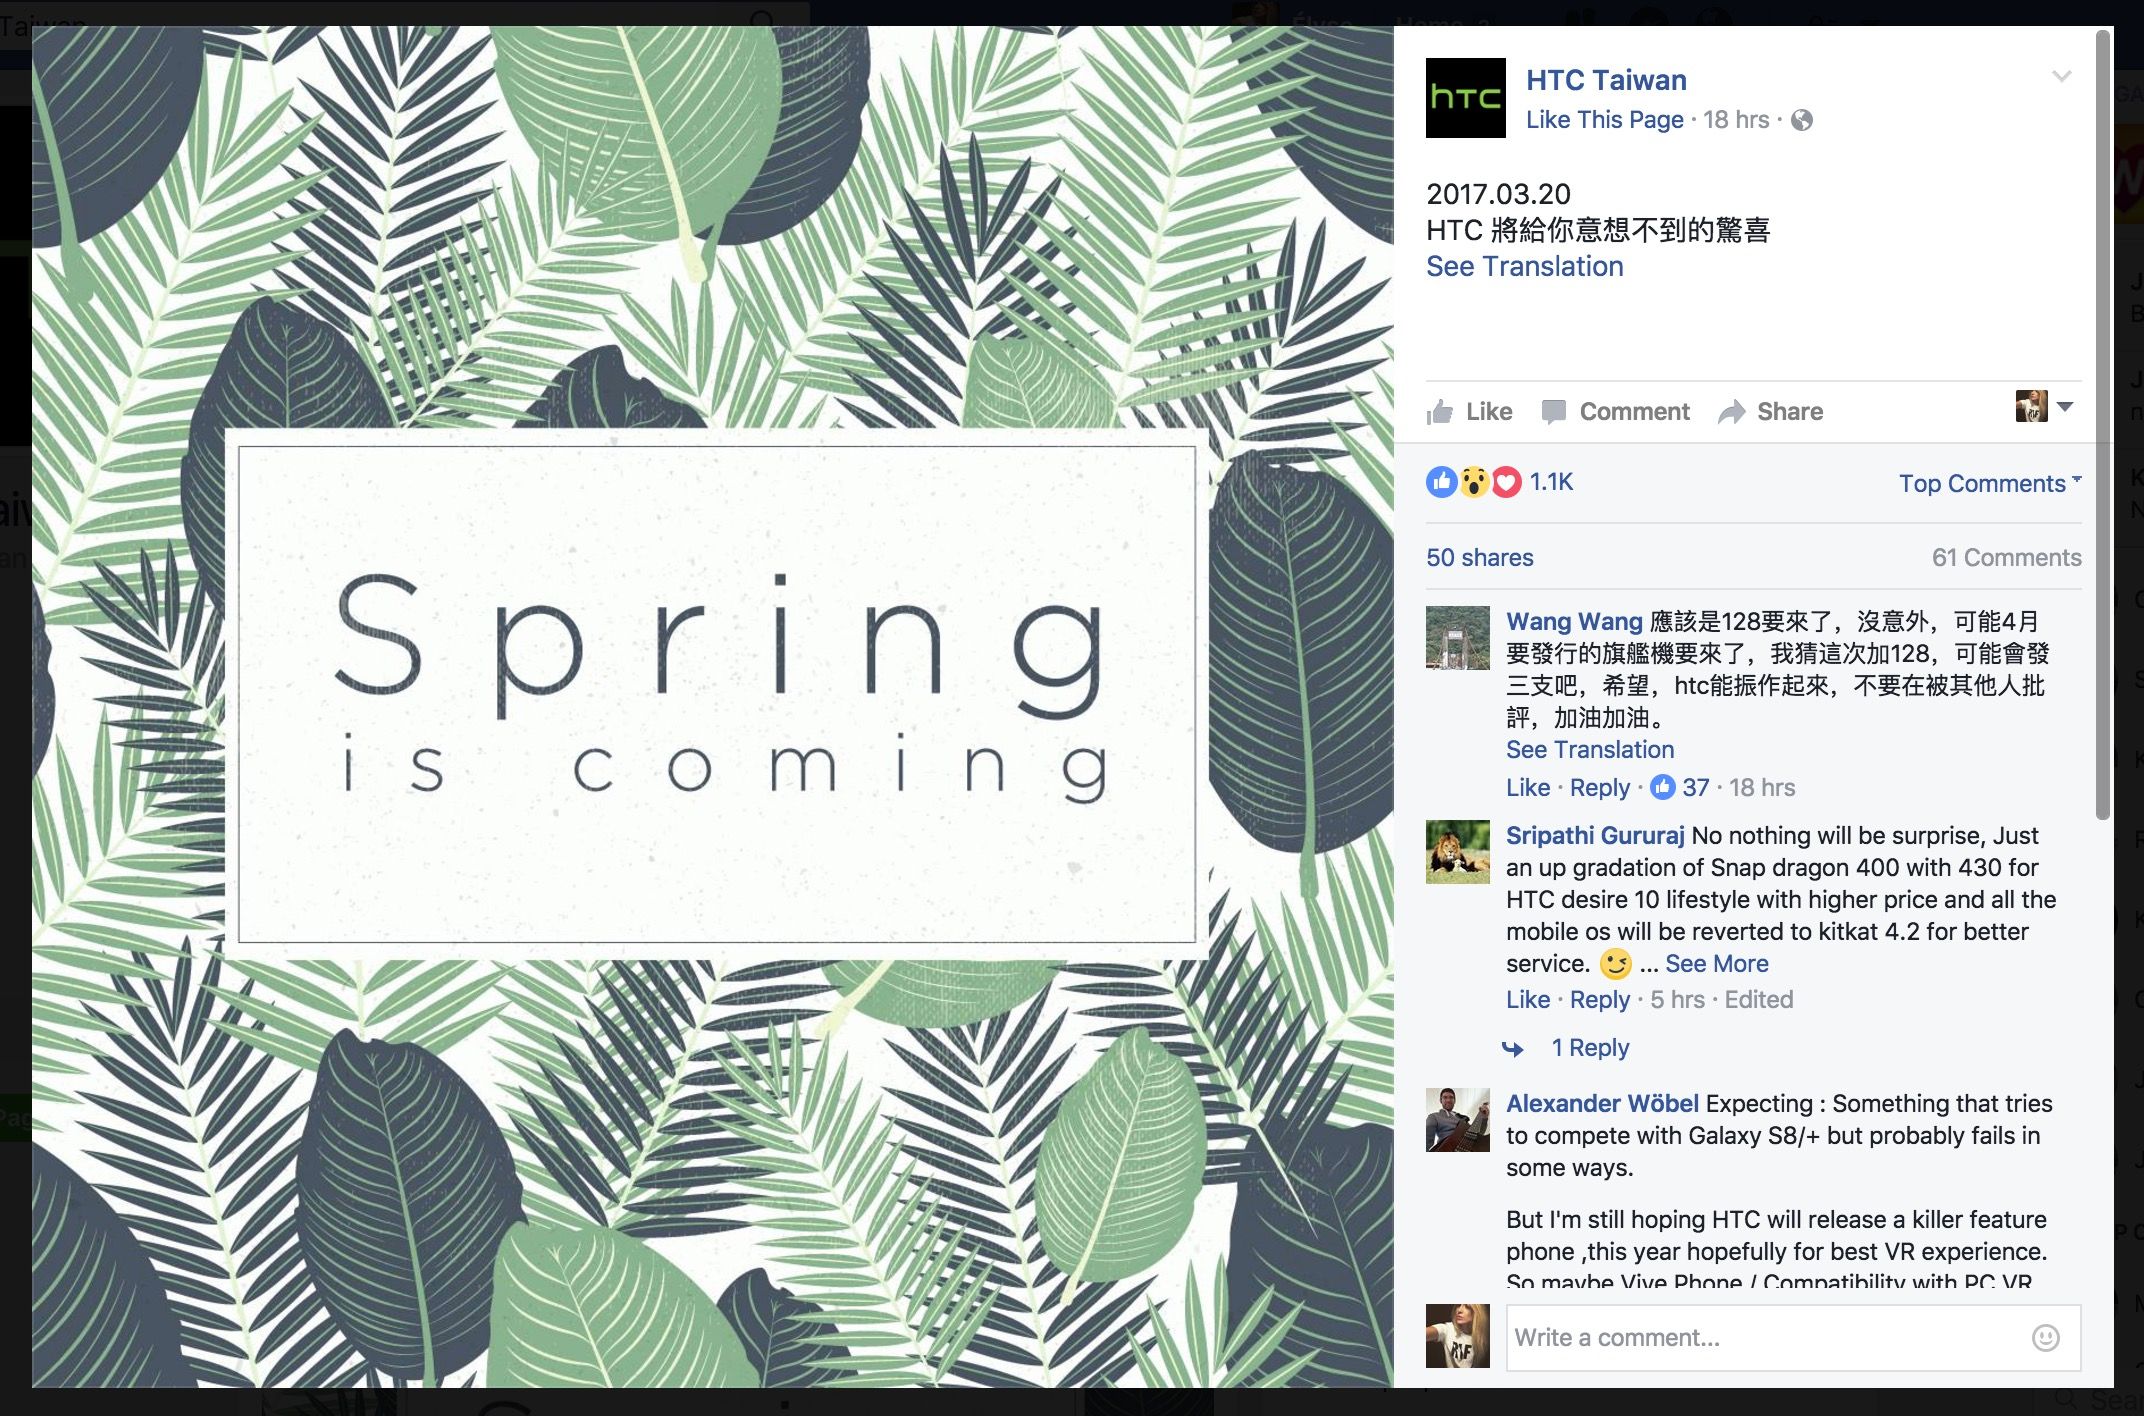 htc teases 20 march spring event likely for htc ocean htc 11 flagship image 1